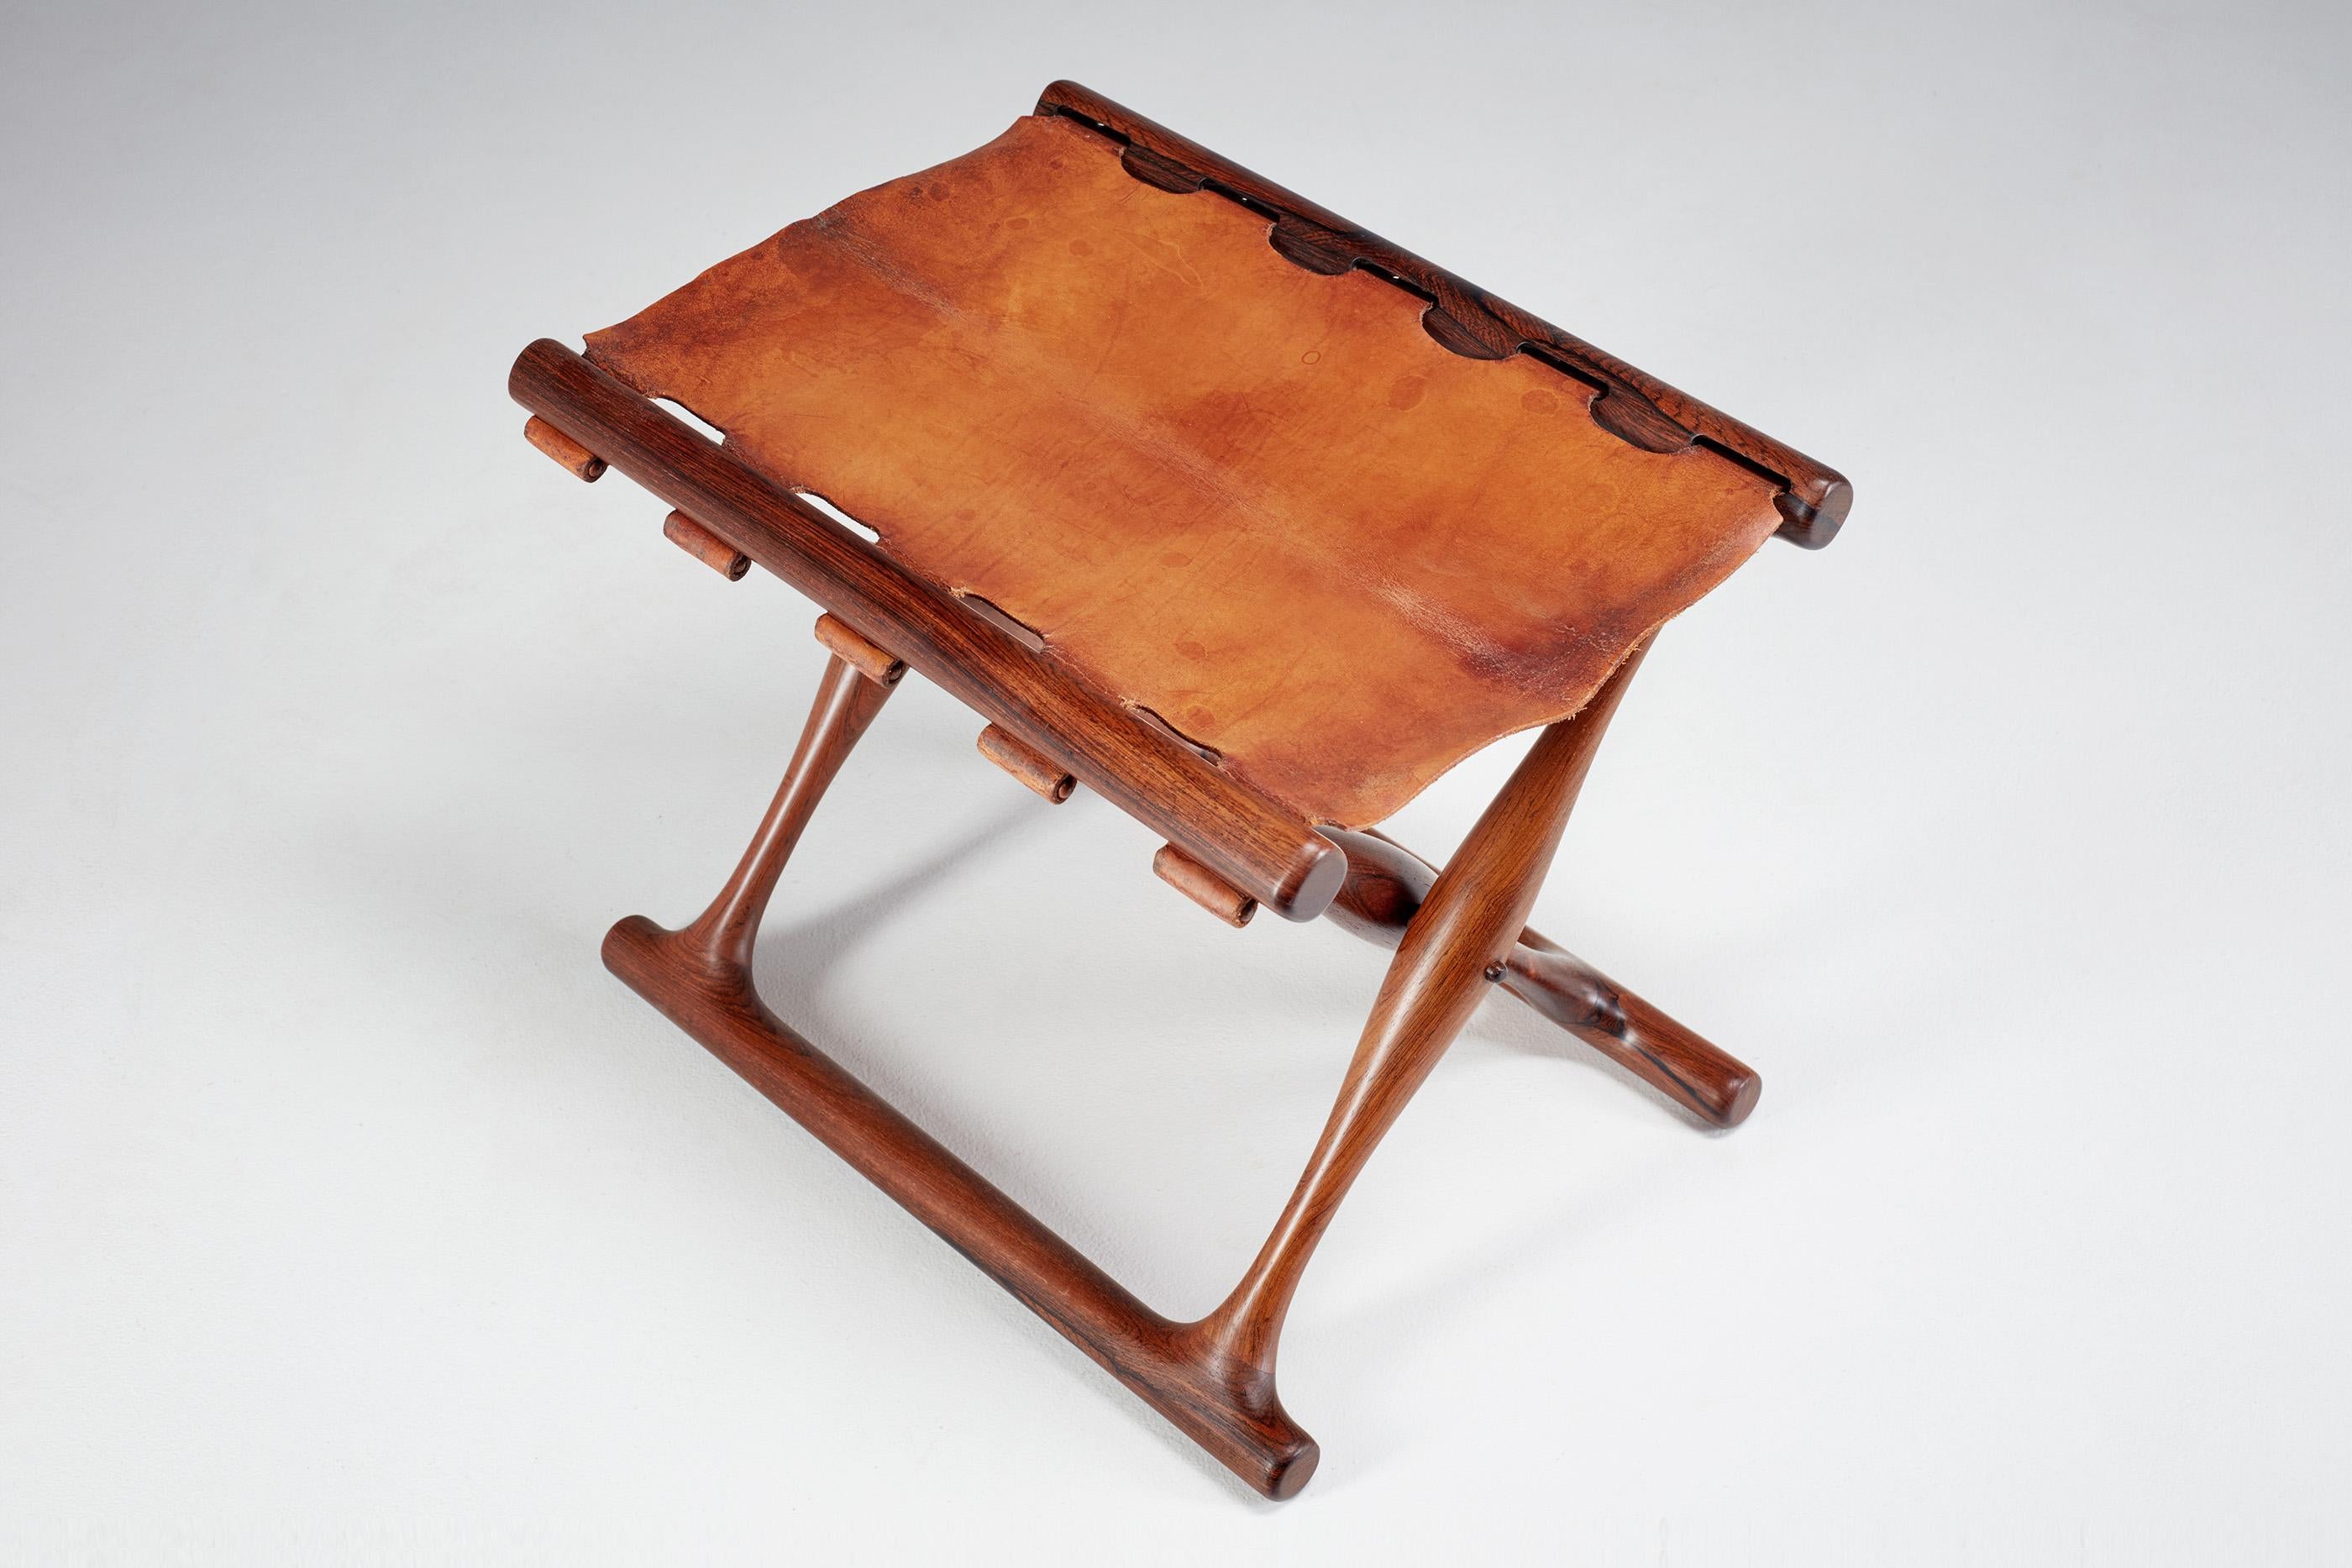 Poul Hundevad Guldhoj Rosewood Folding Stool, 1948 In Good Condition For Sale In London, GB